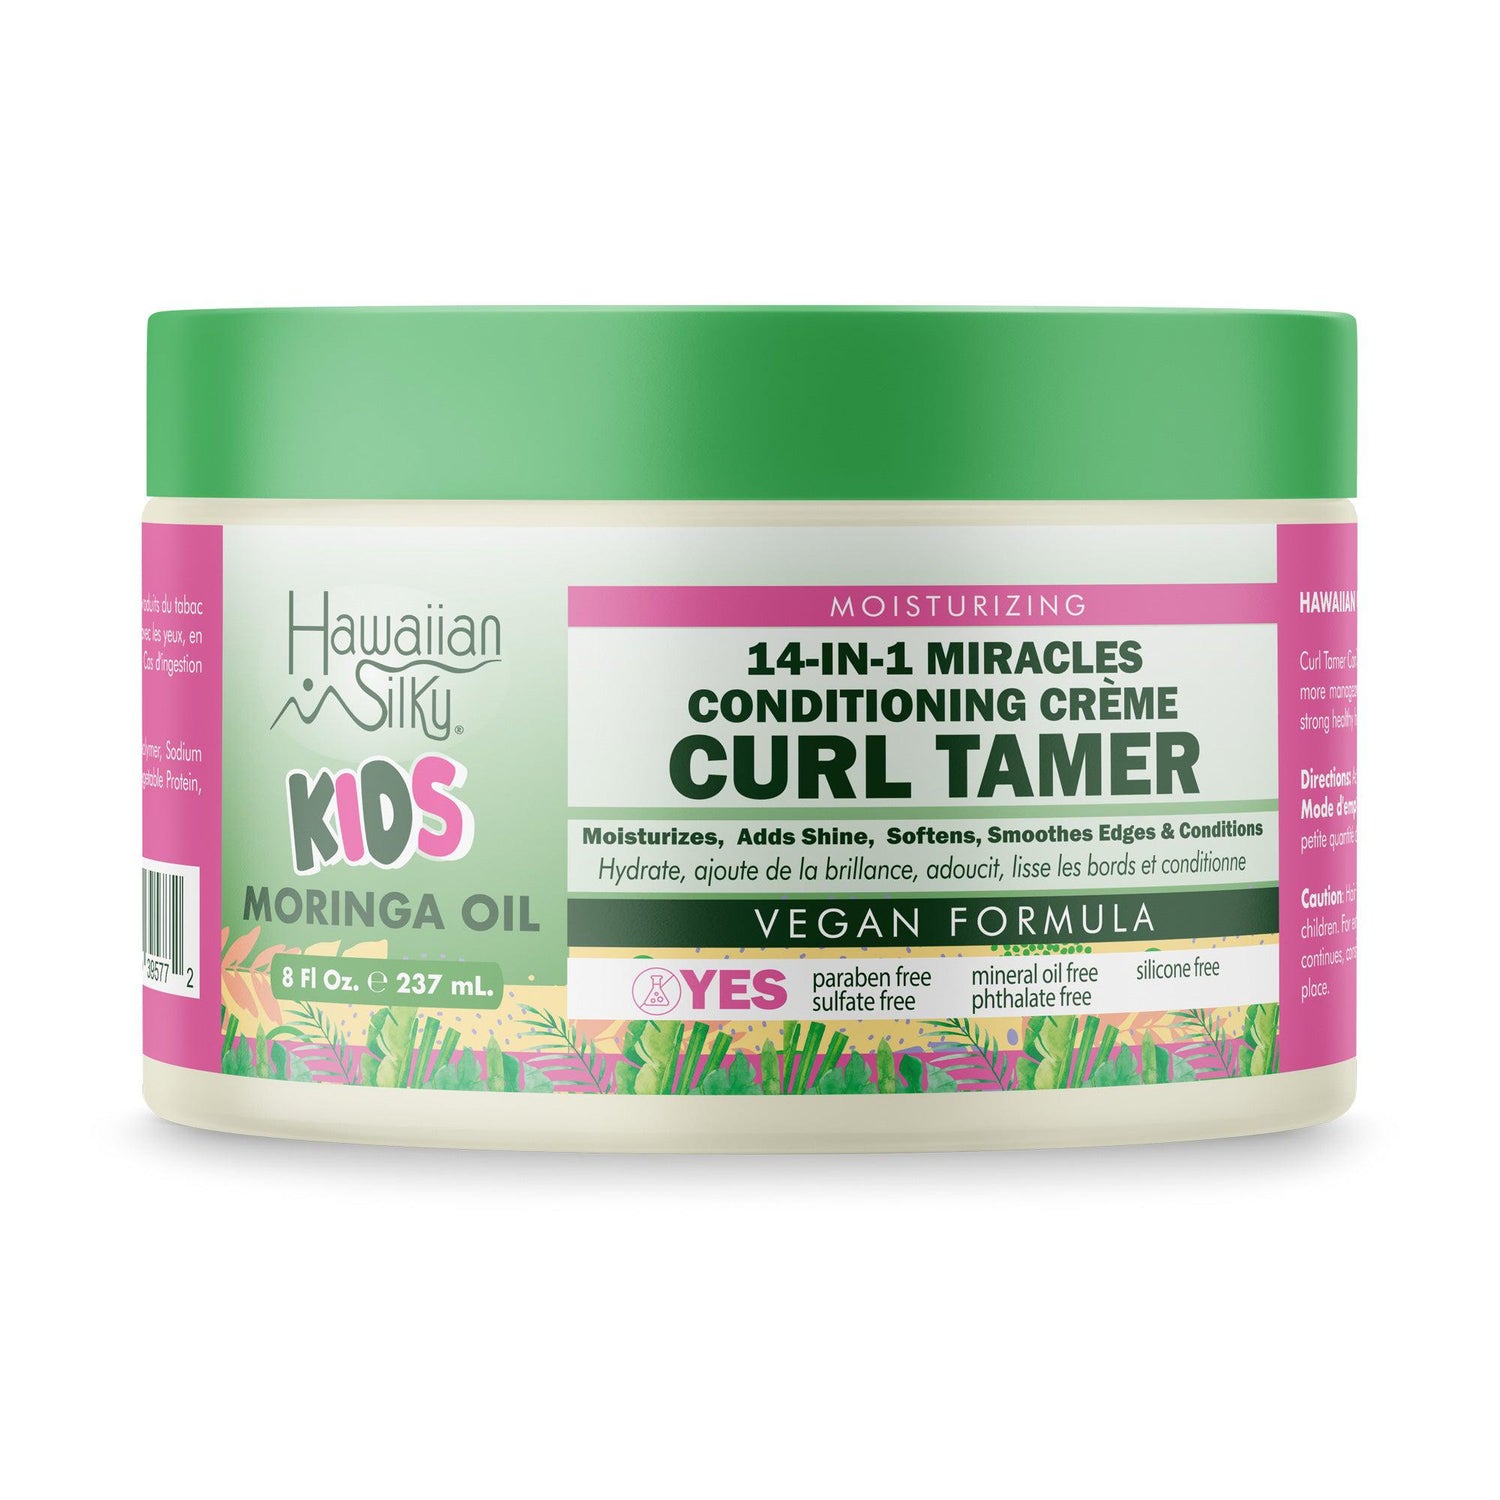 Curl cream for kids - HAWAIIAN SILKY KIDS Conditioning Crème Curl Tamer